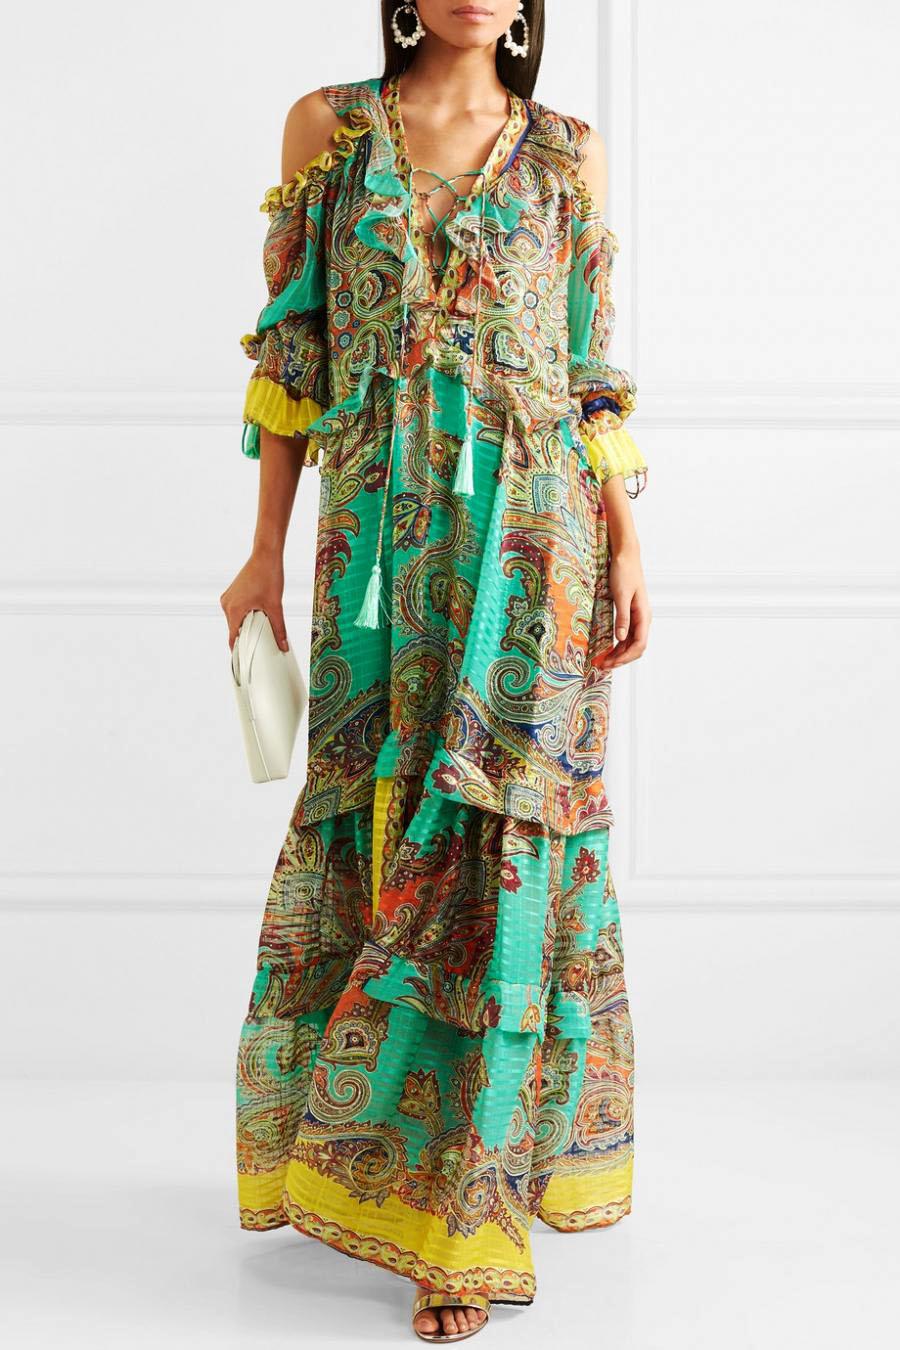 New Etro Silk Printed Embellished Maxi Dress
Italian size - 46
Etro’s dresses look just as glamorous at a gala as they do at a beachside dinner. Expertly cut in Italy from fluid silk, this floor-sweeping design is printed with the brand’s paisley